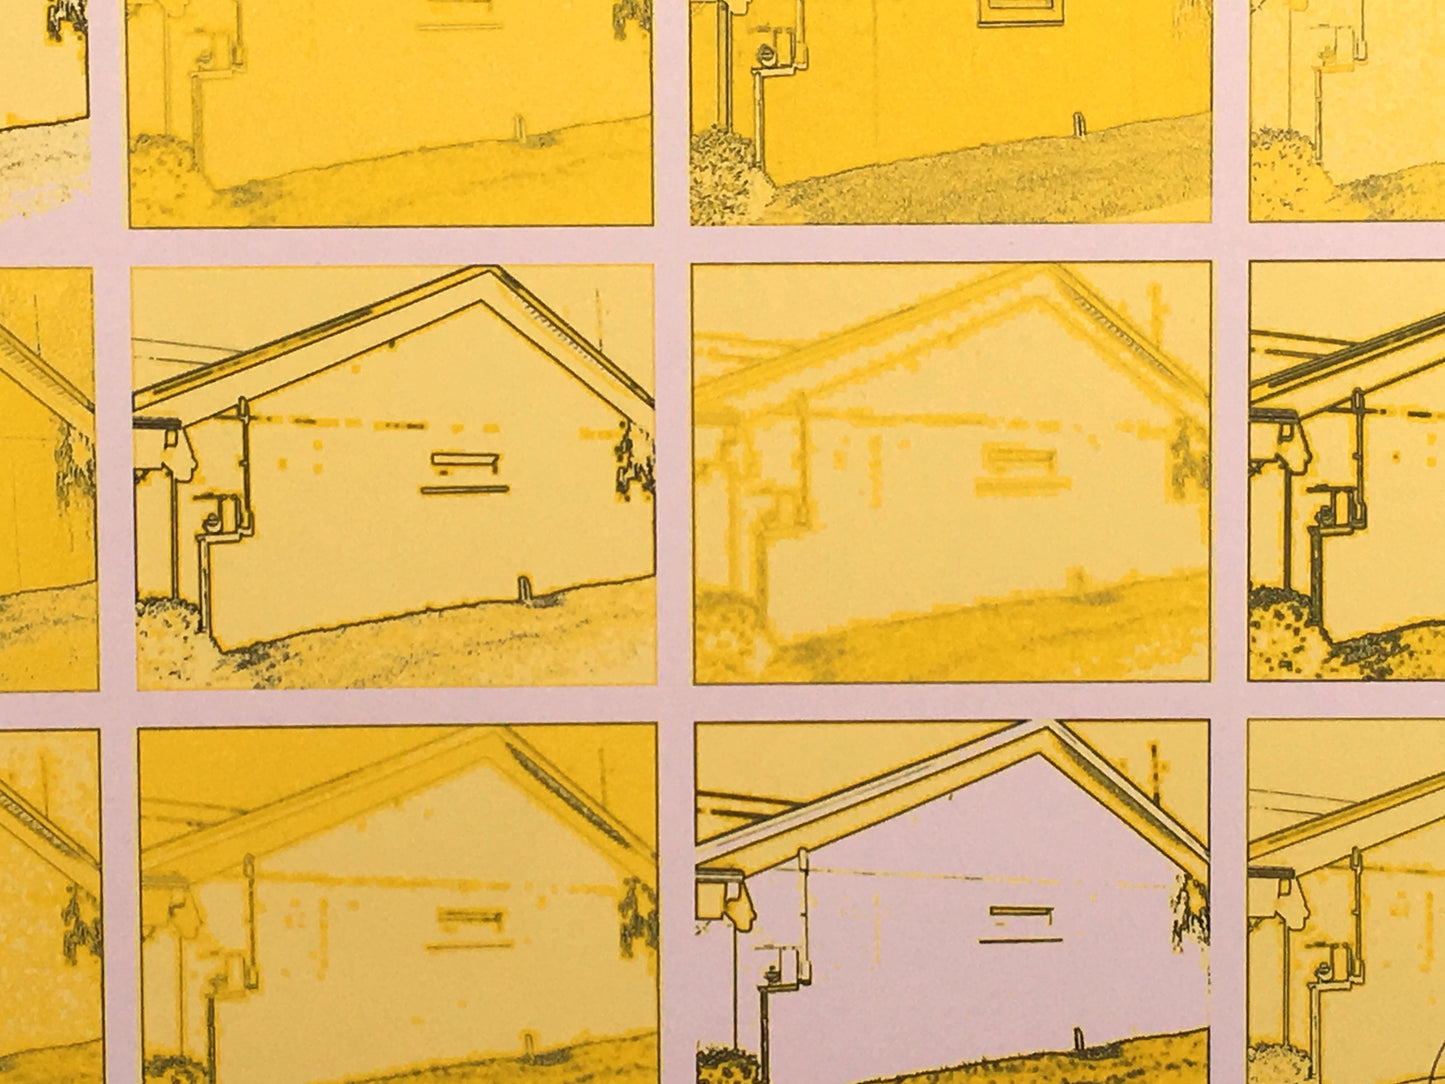 [SOLD] Suga Lane "Ranch Houses" in Yellow Artist's Proof 1/1 from Irma Series